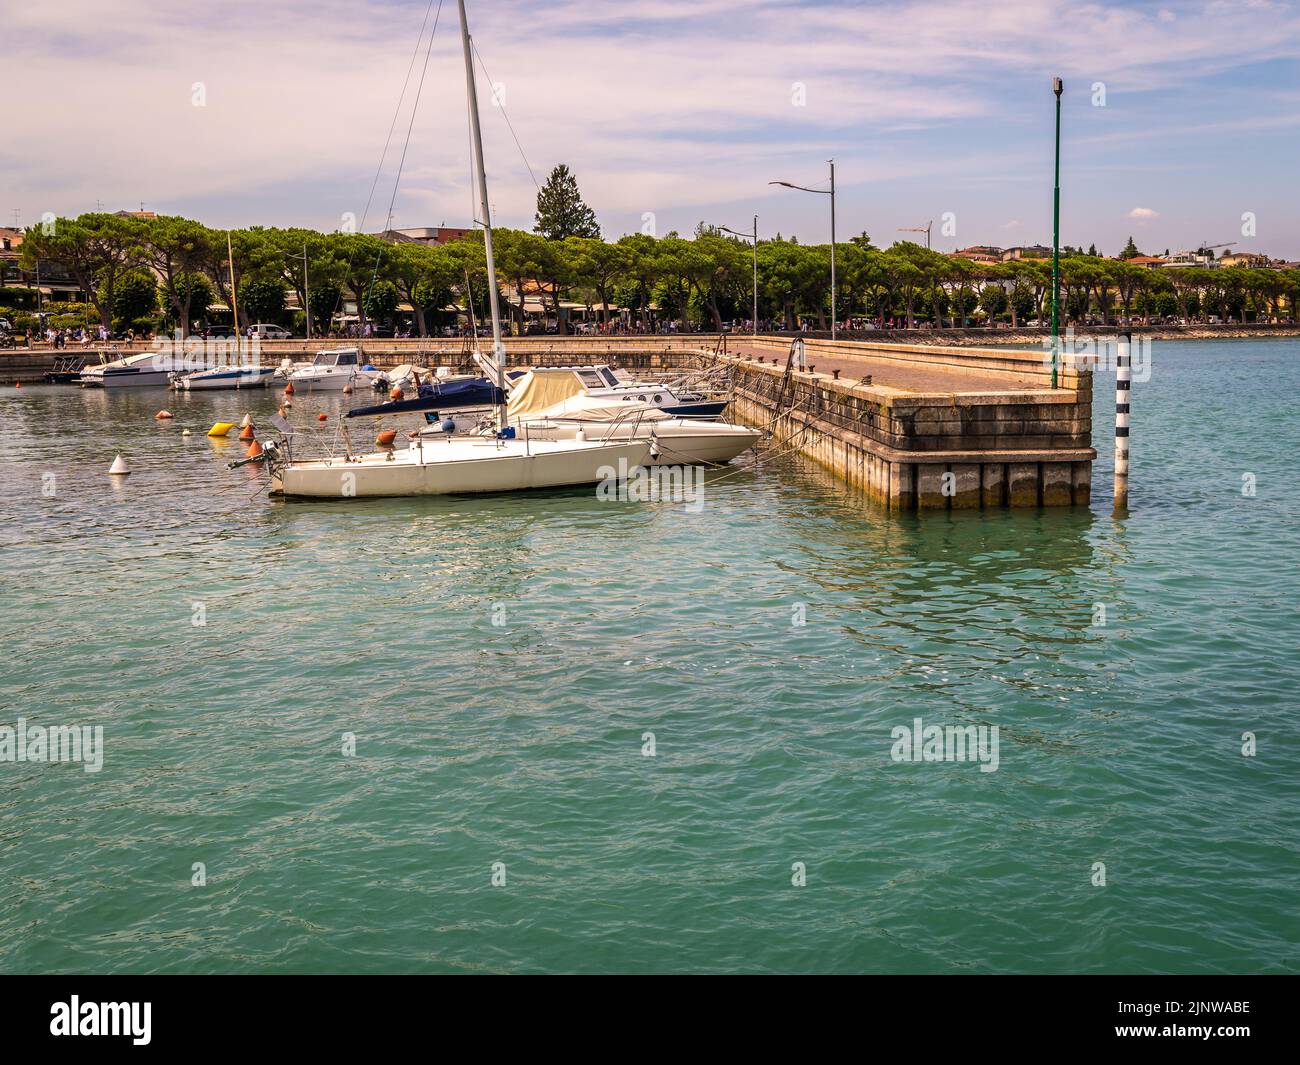 Peschiera del Garda town. Little town Harbour with colorful boats. Italian Garda lake, Veneto region of northern Italy - Charming fortified citadel Stock Photo